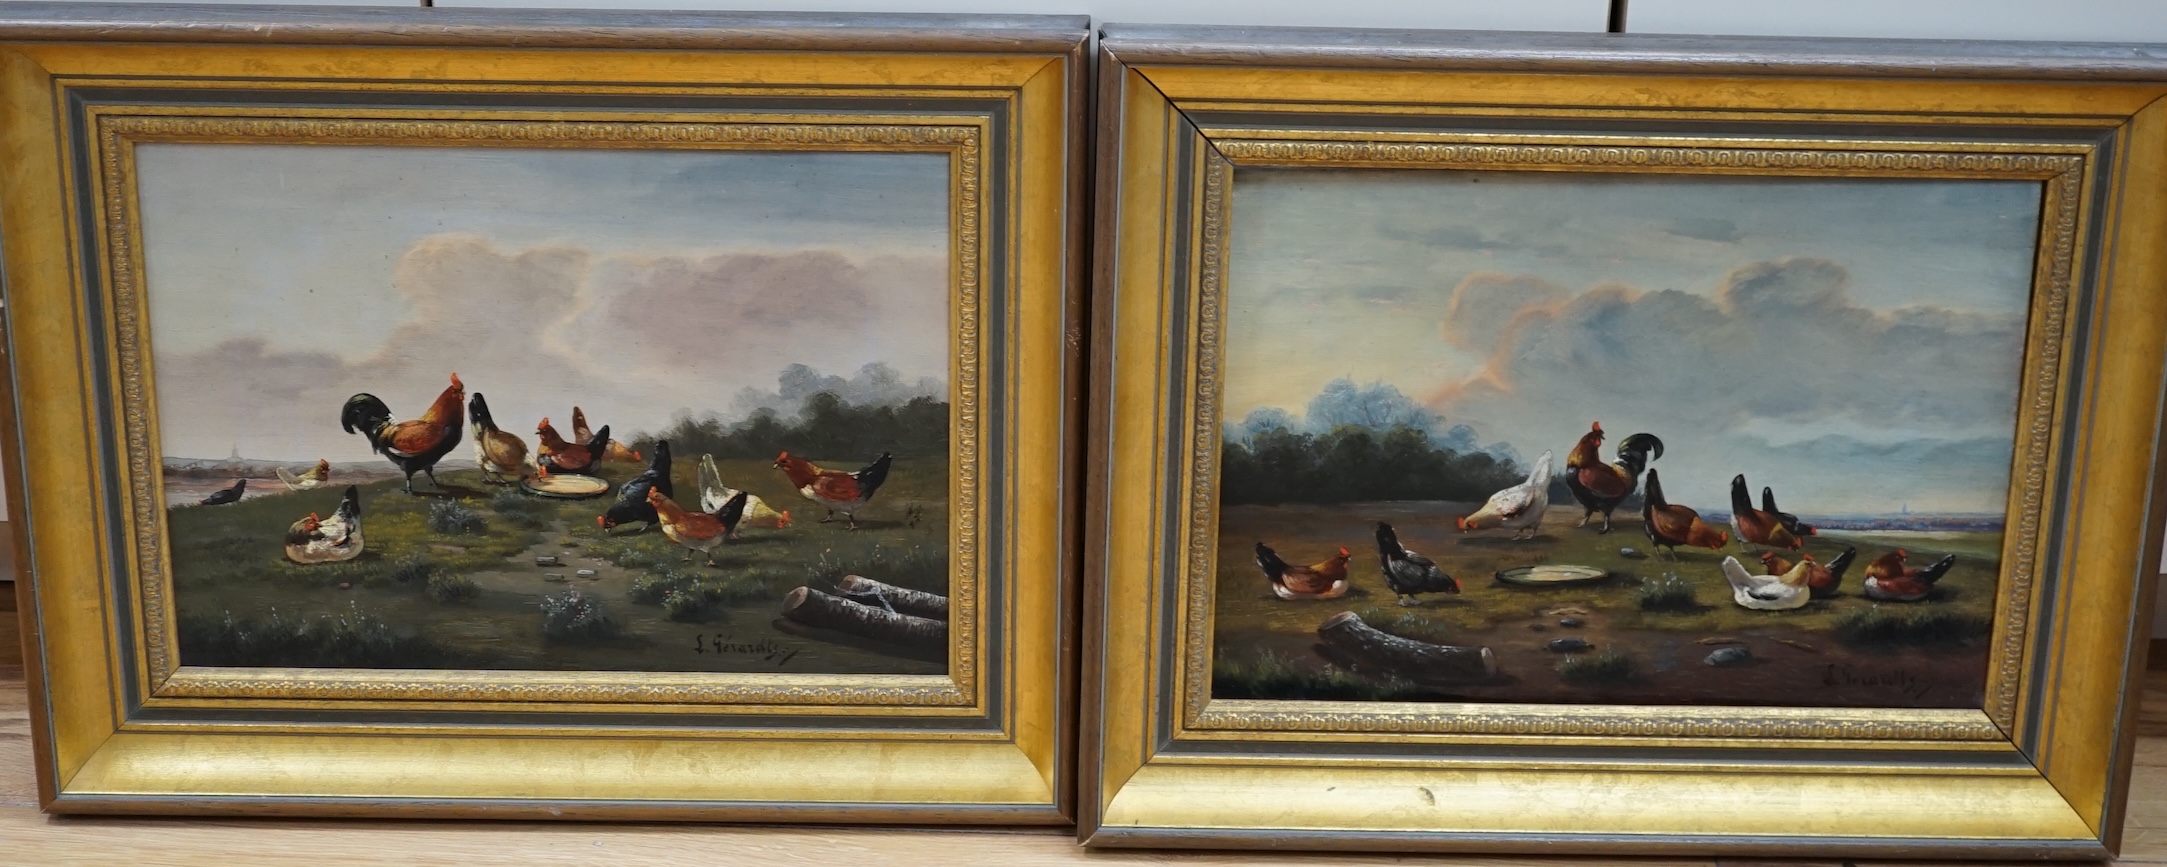 L. Gerardts (Dutch), pair of oils on canvas, Chickens before landscapes, signed, 24 x 34cm. Condition - fair to good                                                                                                        